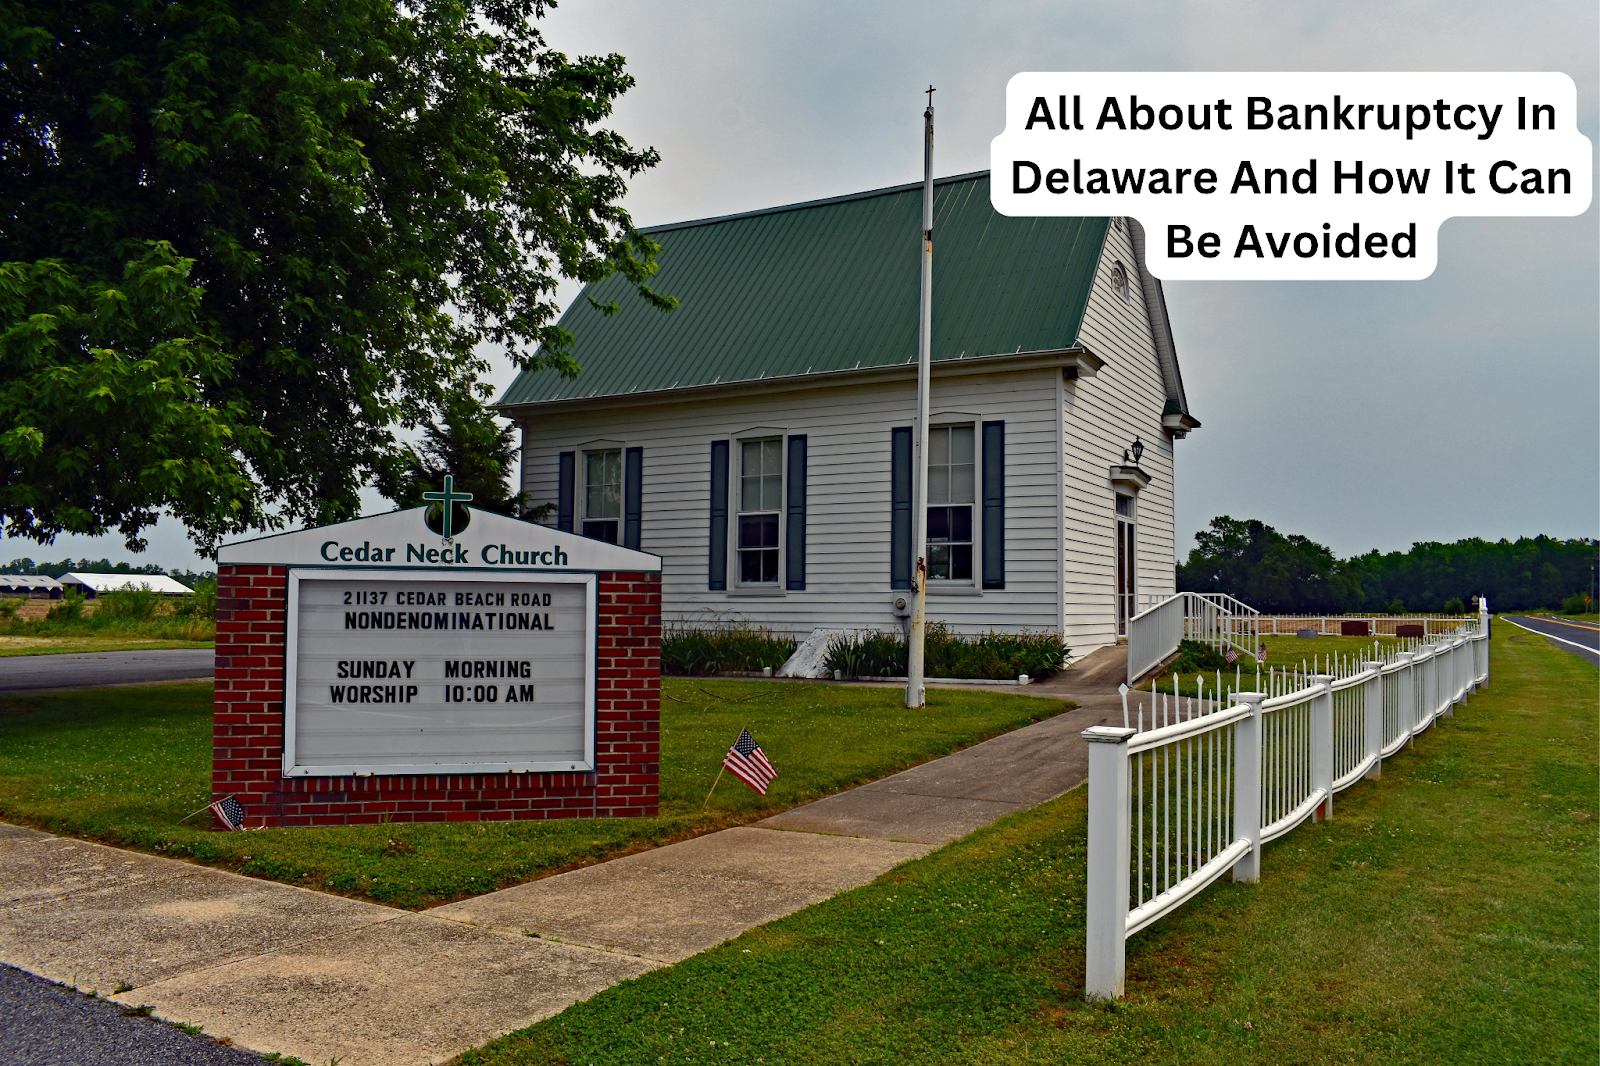 All About Bankruptcy In Delaware And How It Can Be Avoided